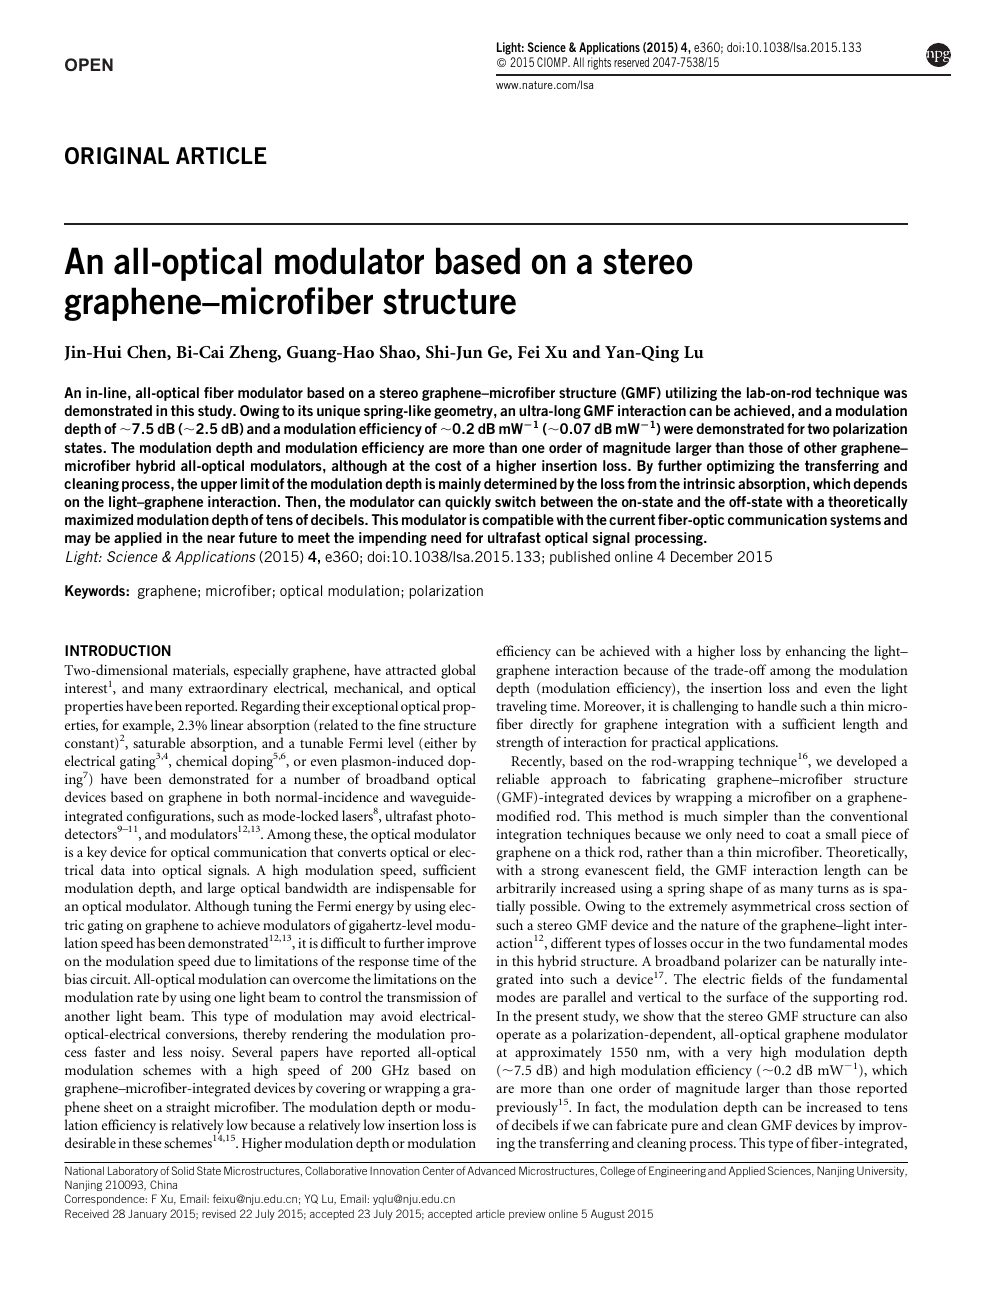 An All Optical Modulator Based On A Stereo Graphene Microfiber Structure Topic Of Research Paper In Nano Technology Download Scholarly Article Pdf And Read For Free On Cyberleninka Open Science Hub